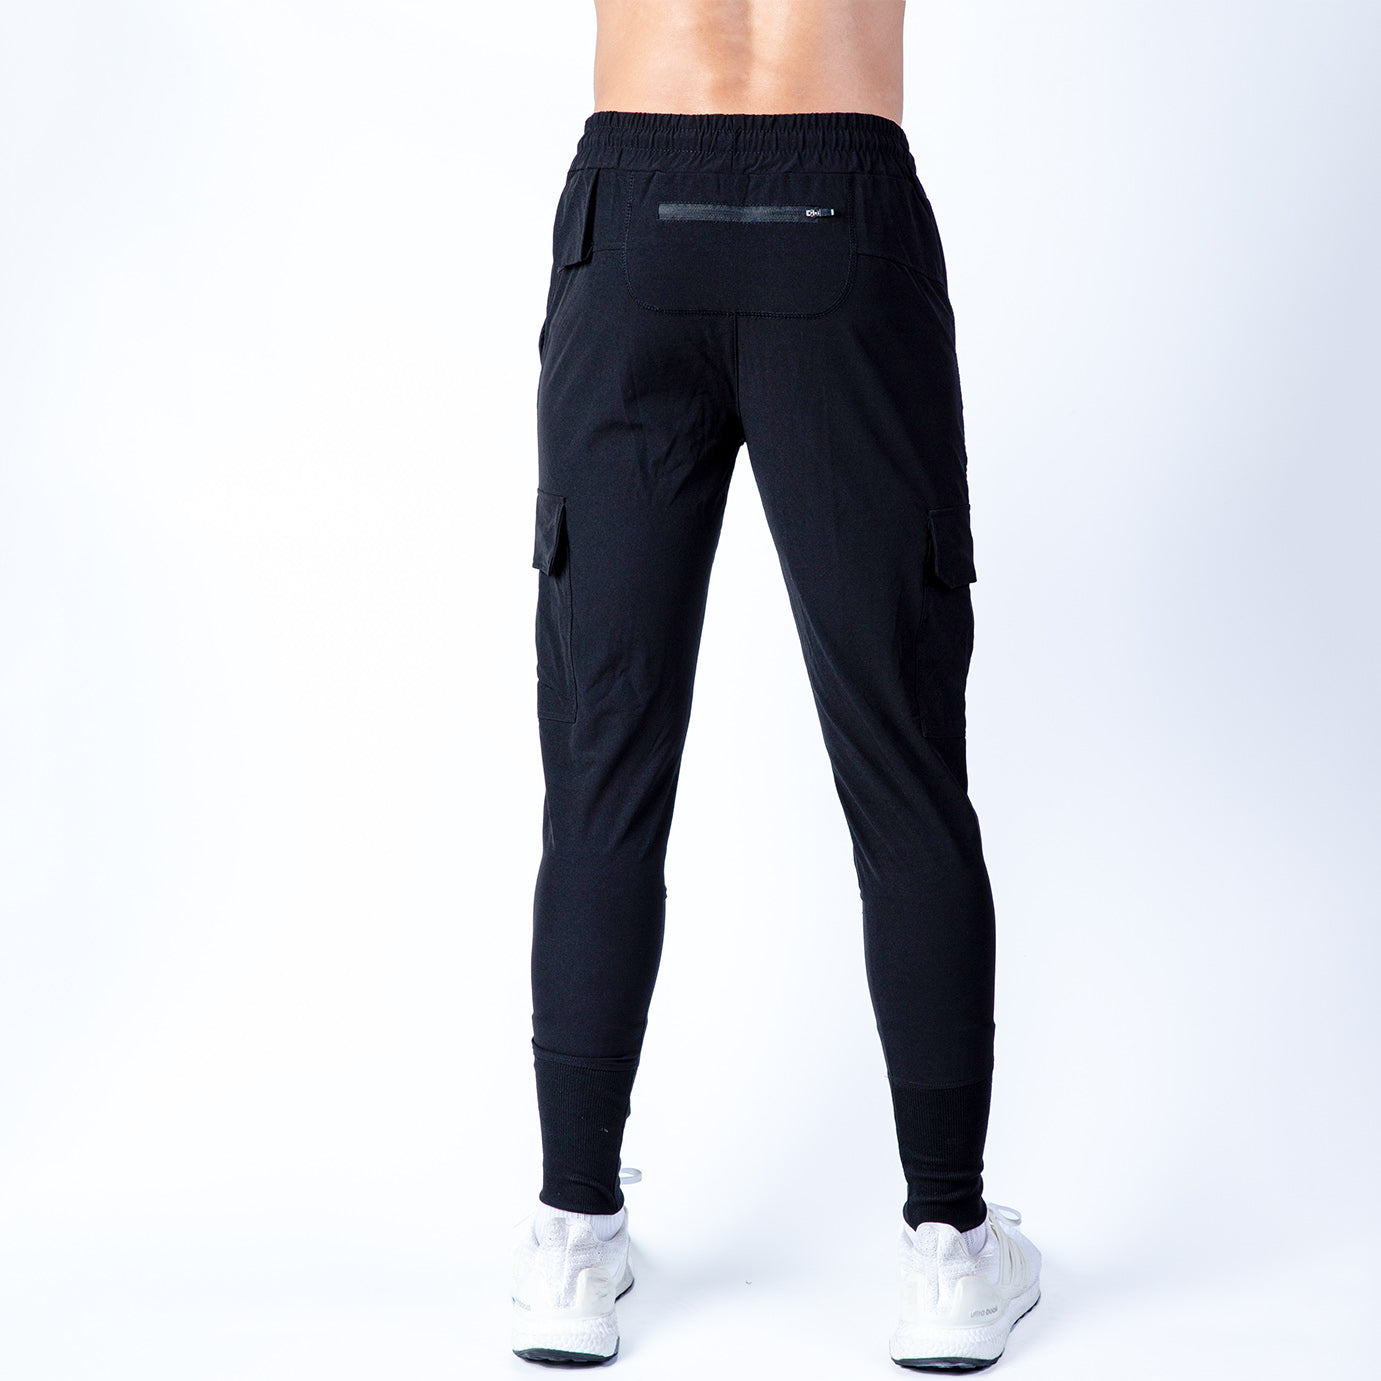 Musculo cargo gym pants // Black